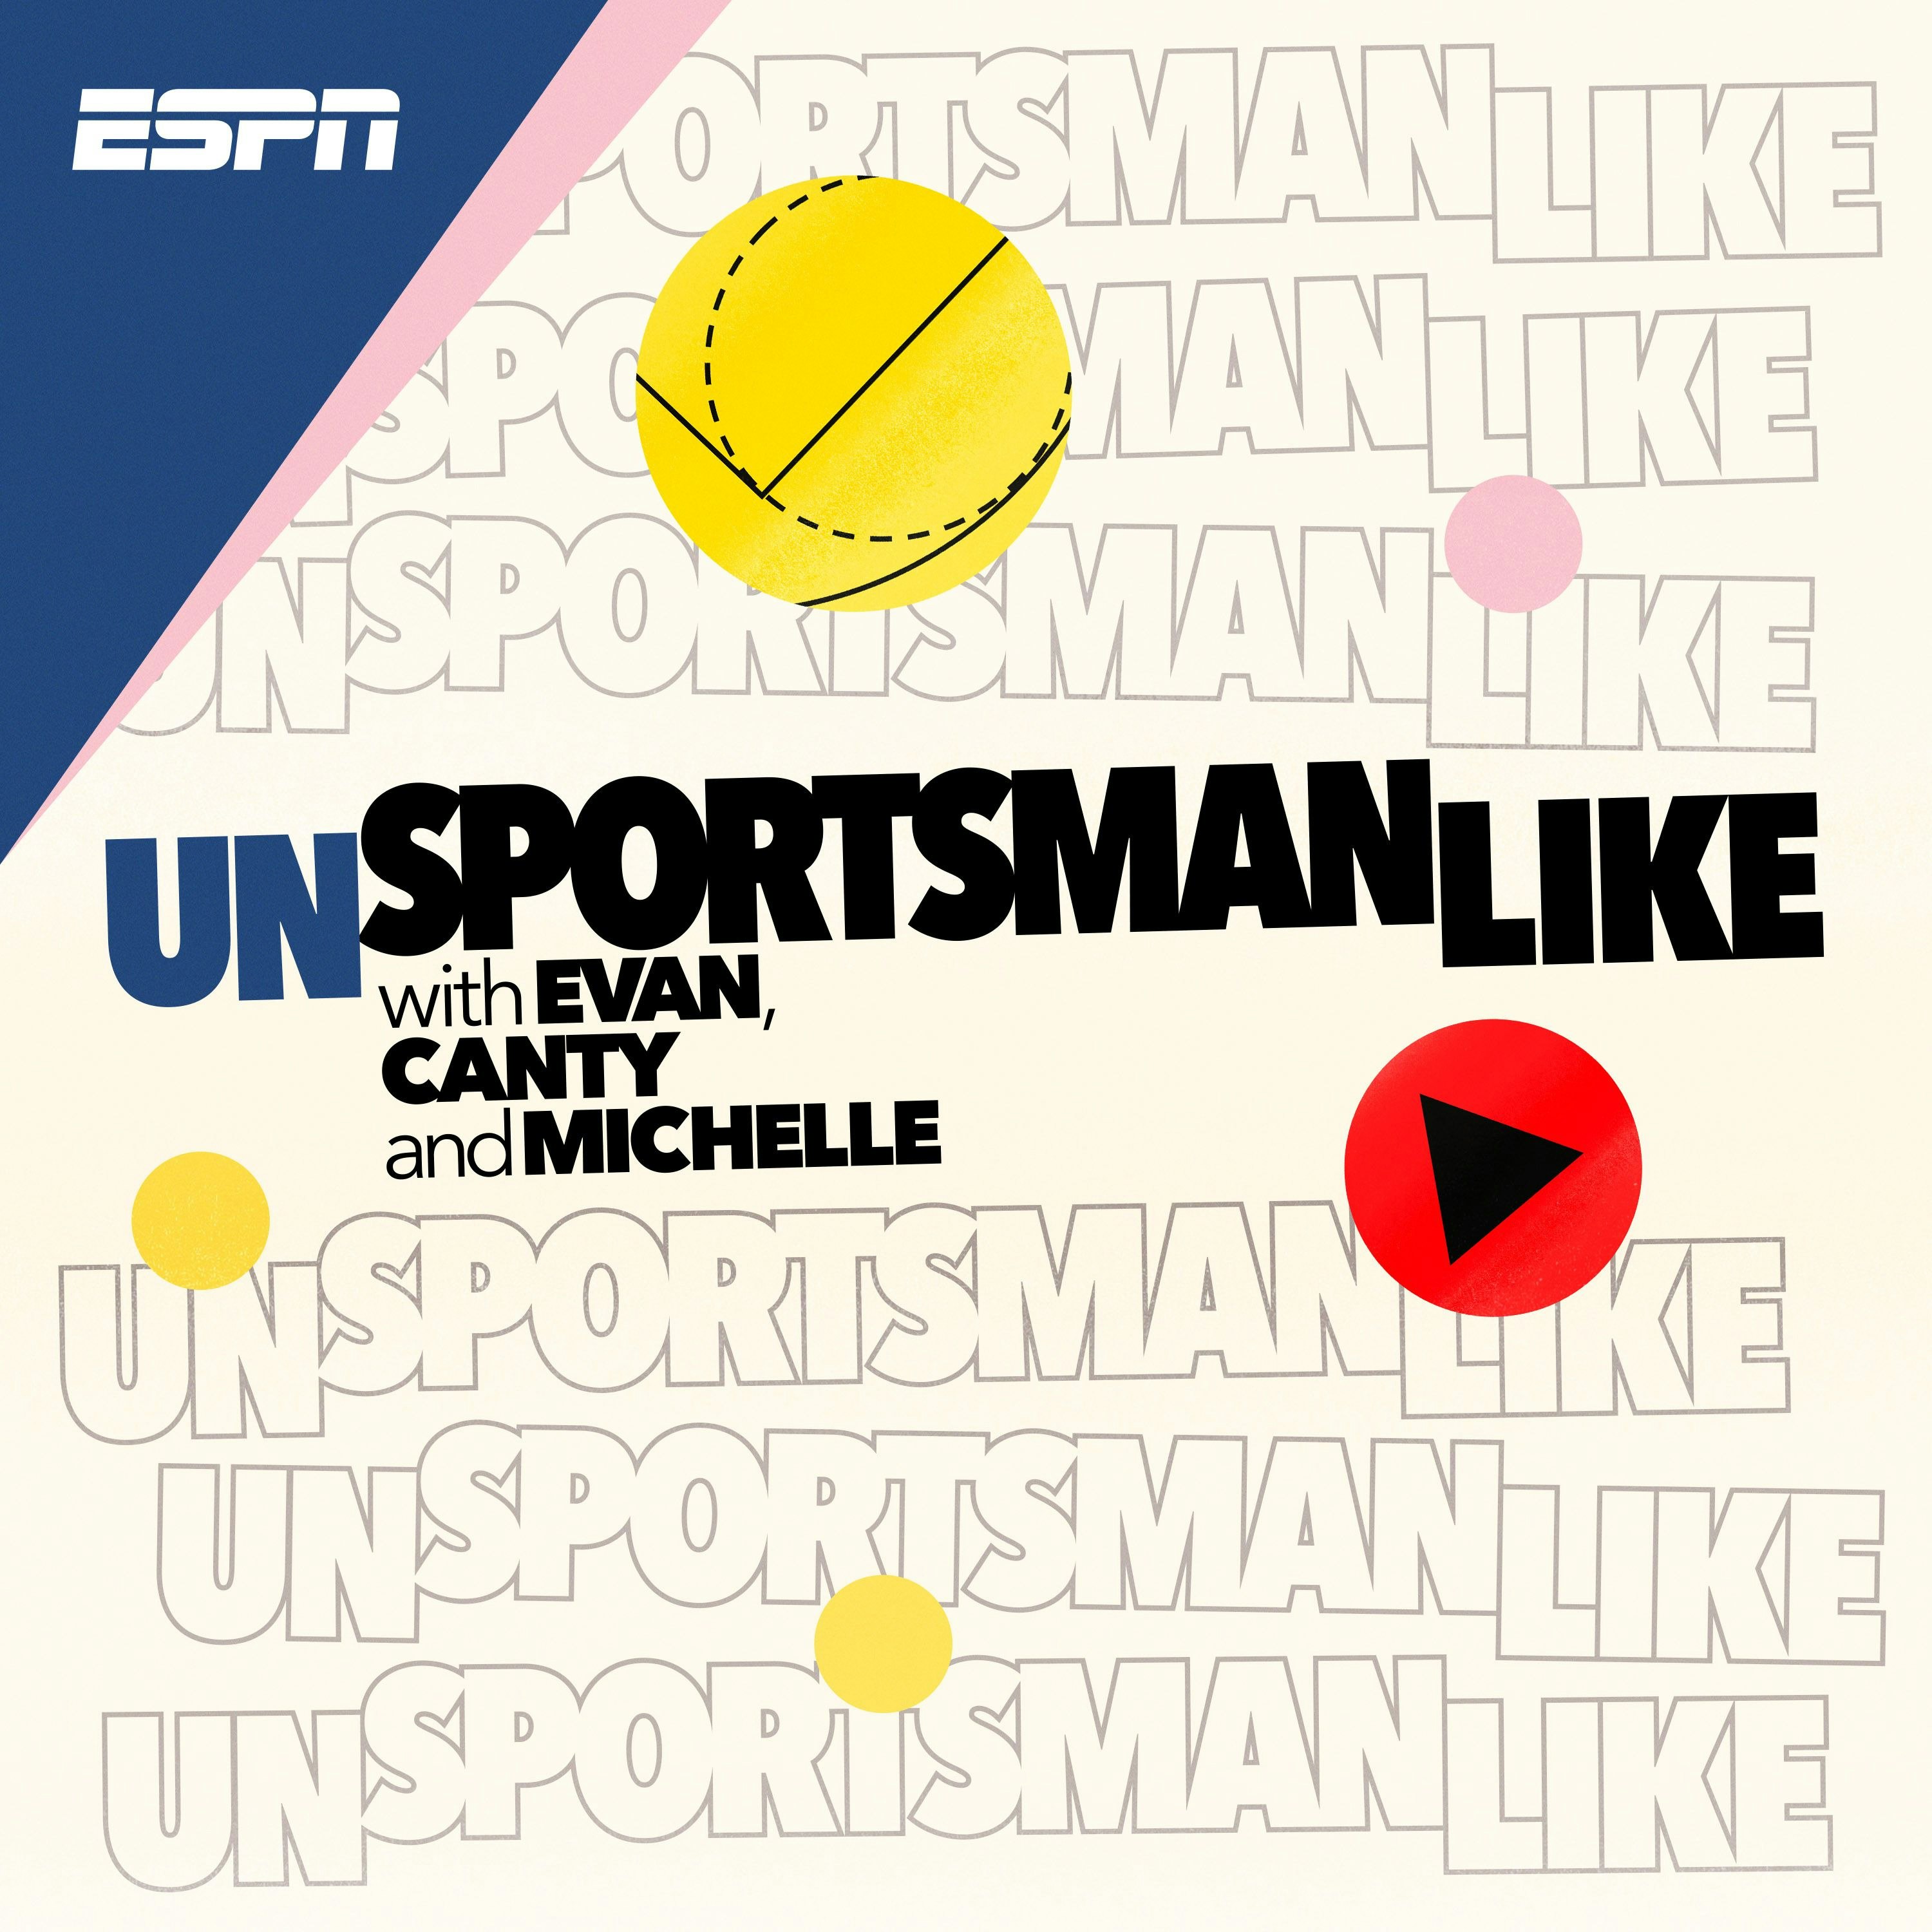 Unsportsmanlike with Evan, Canty and Michelle